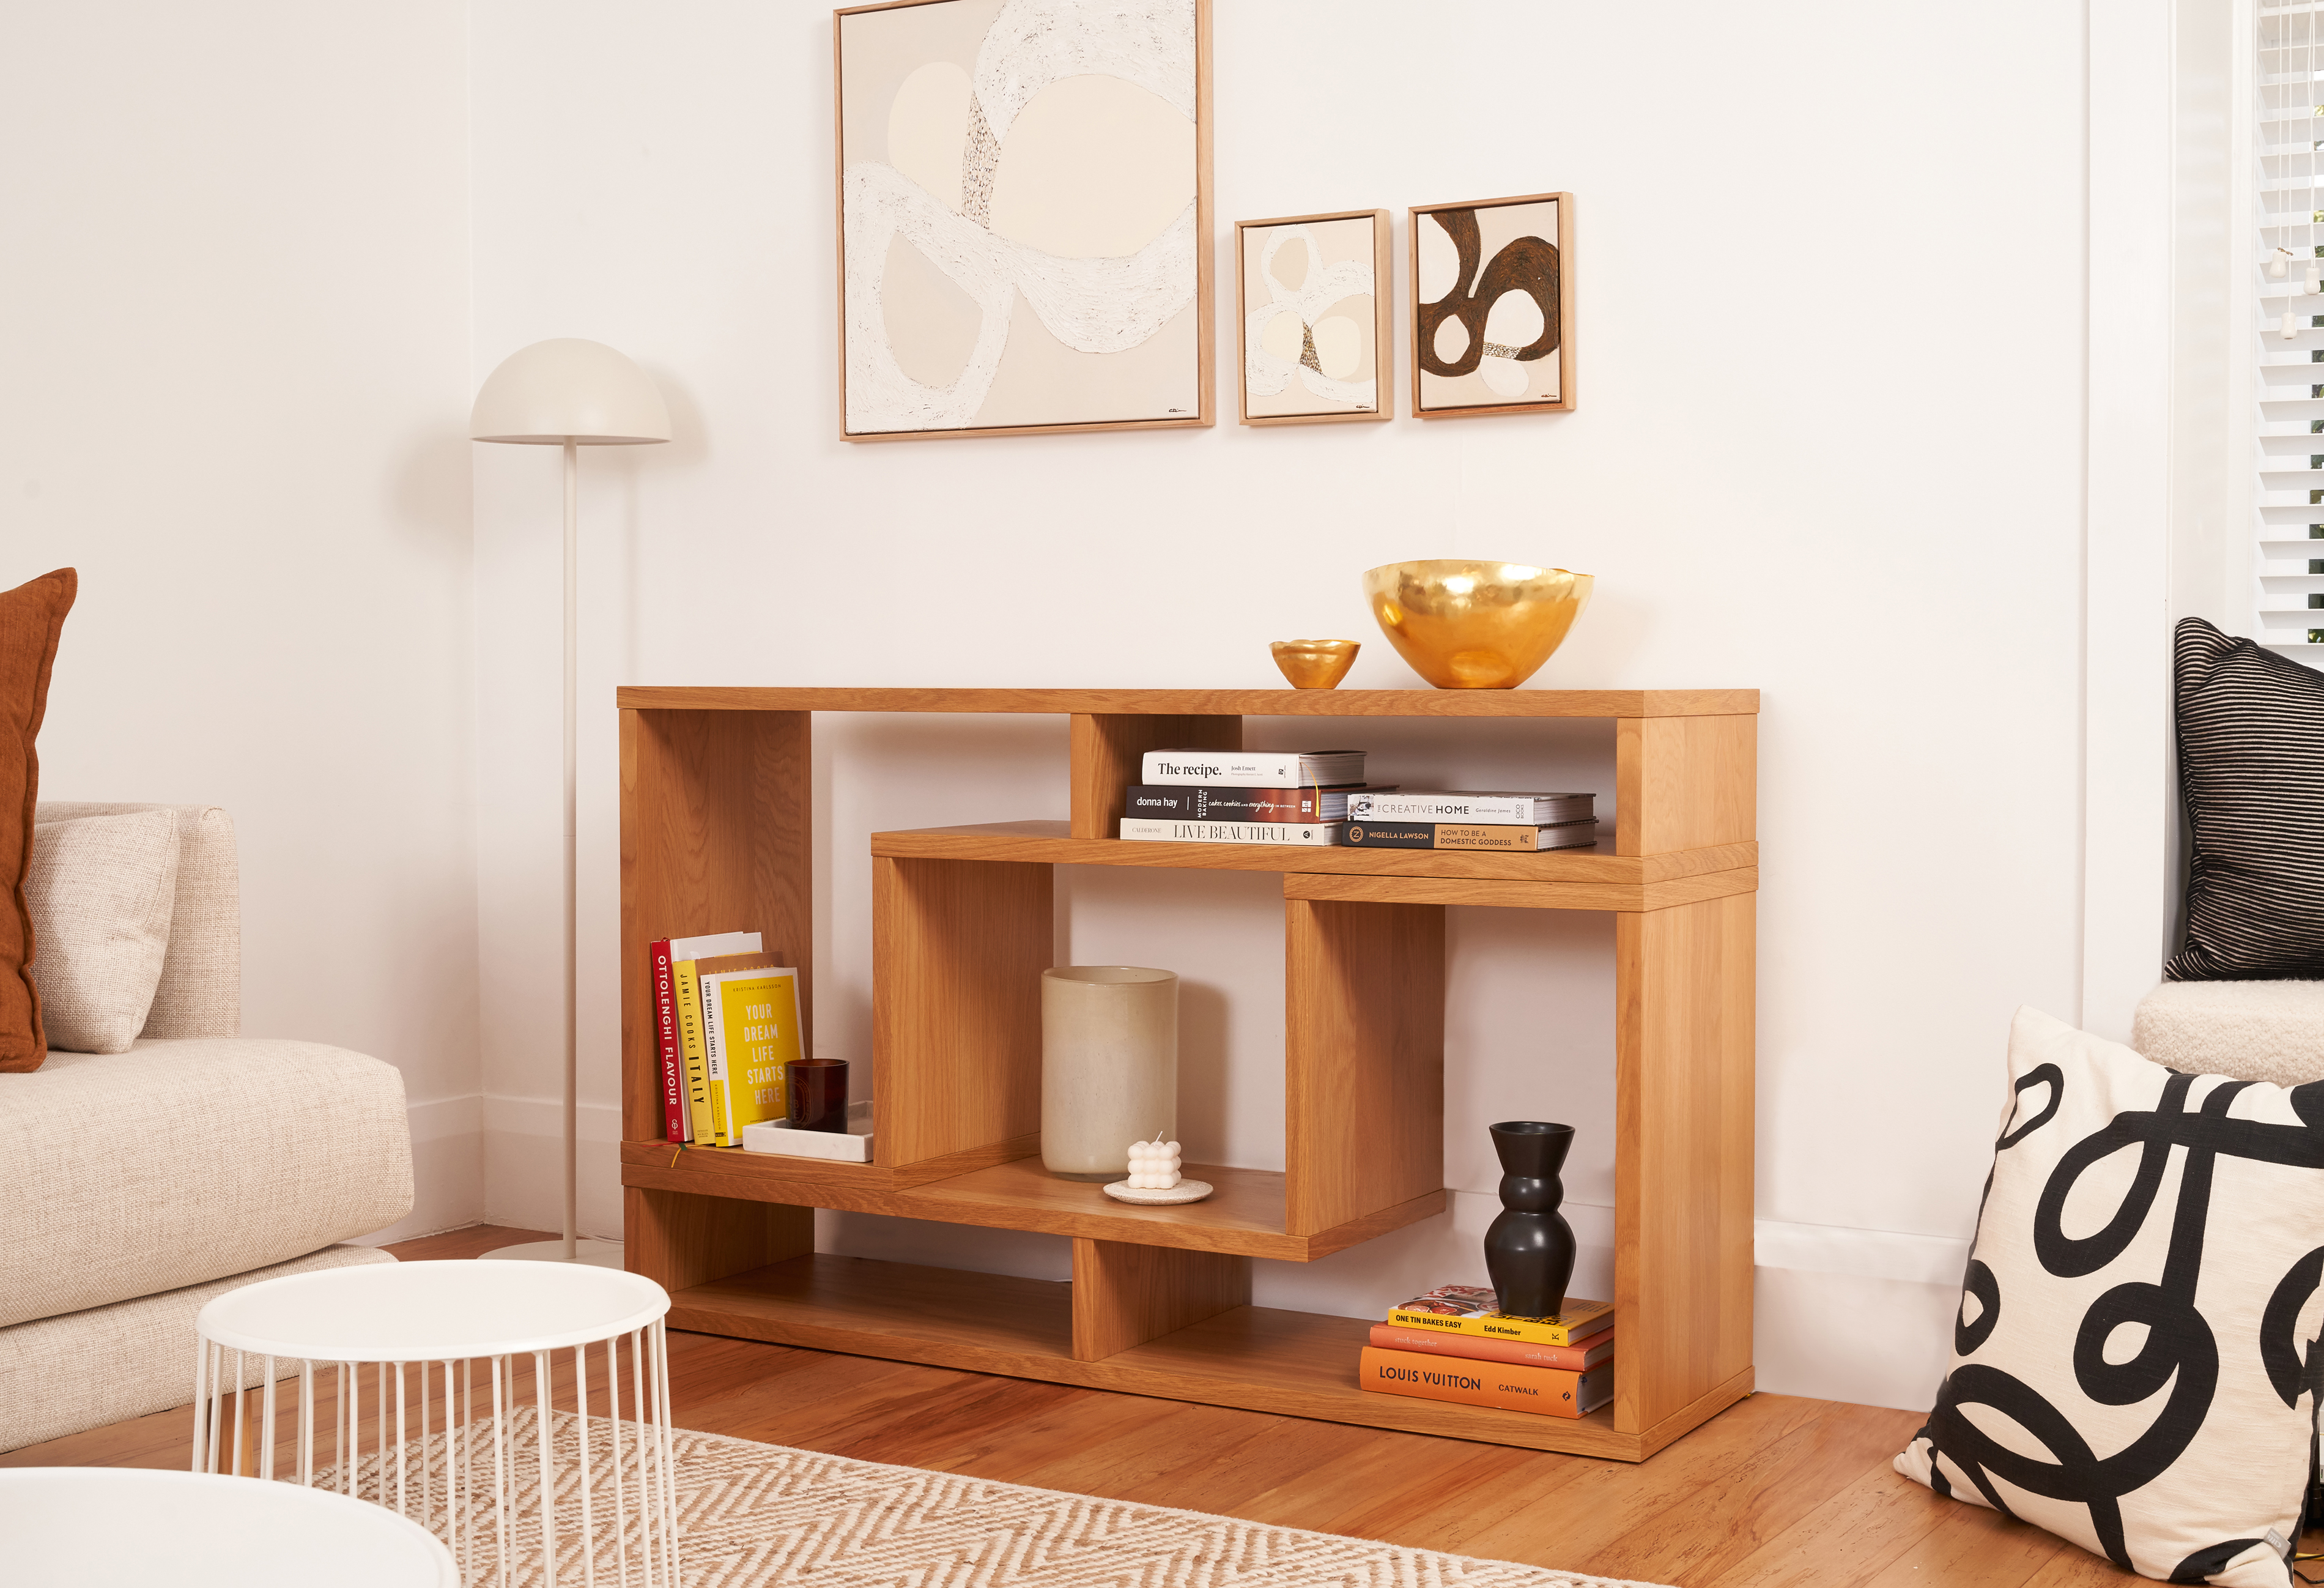 HOW TO FURNISH A SMALL SPACE